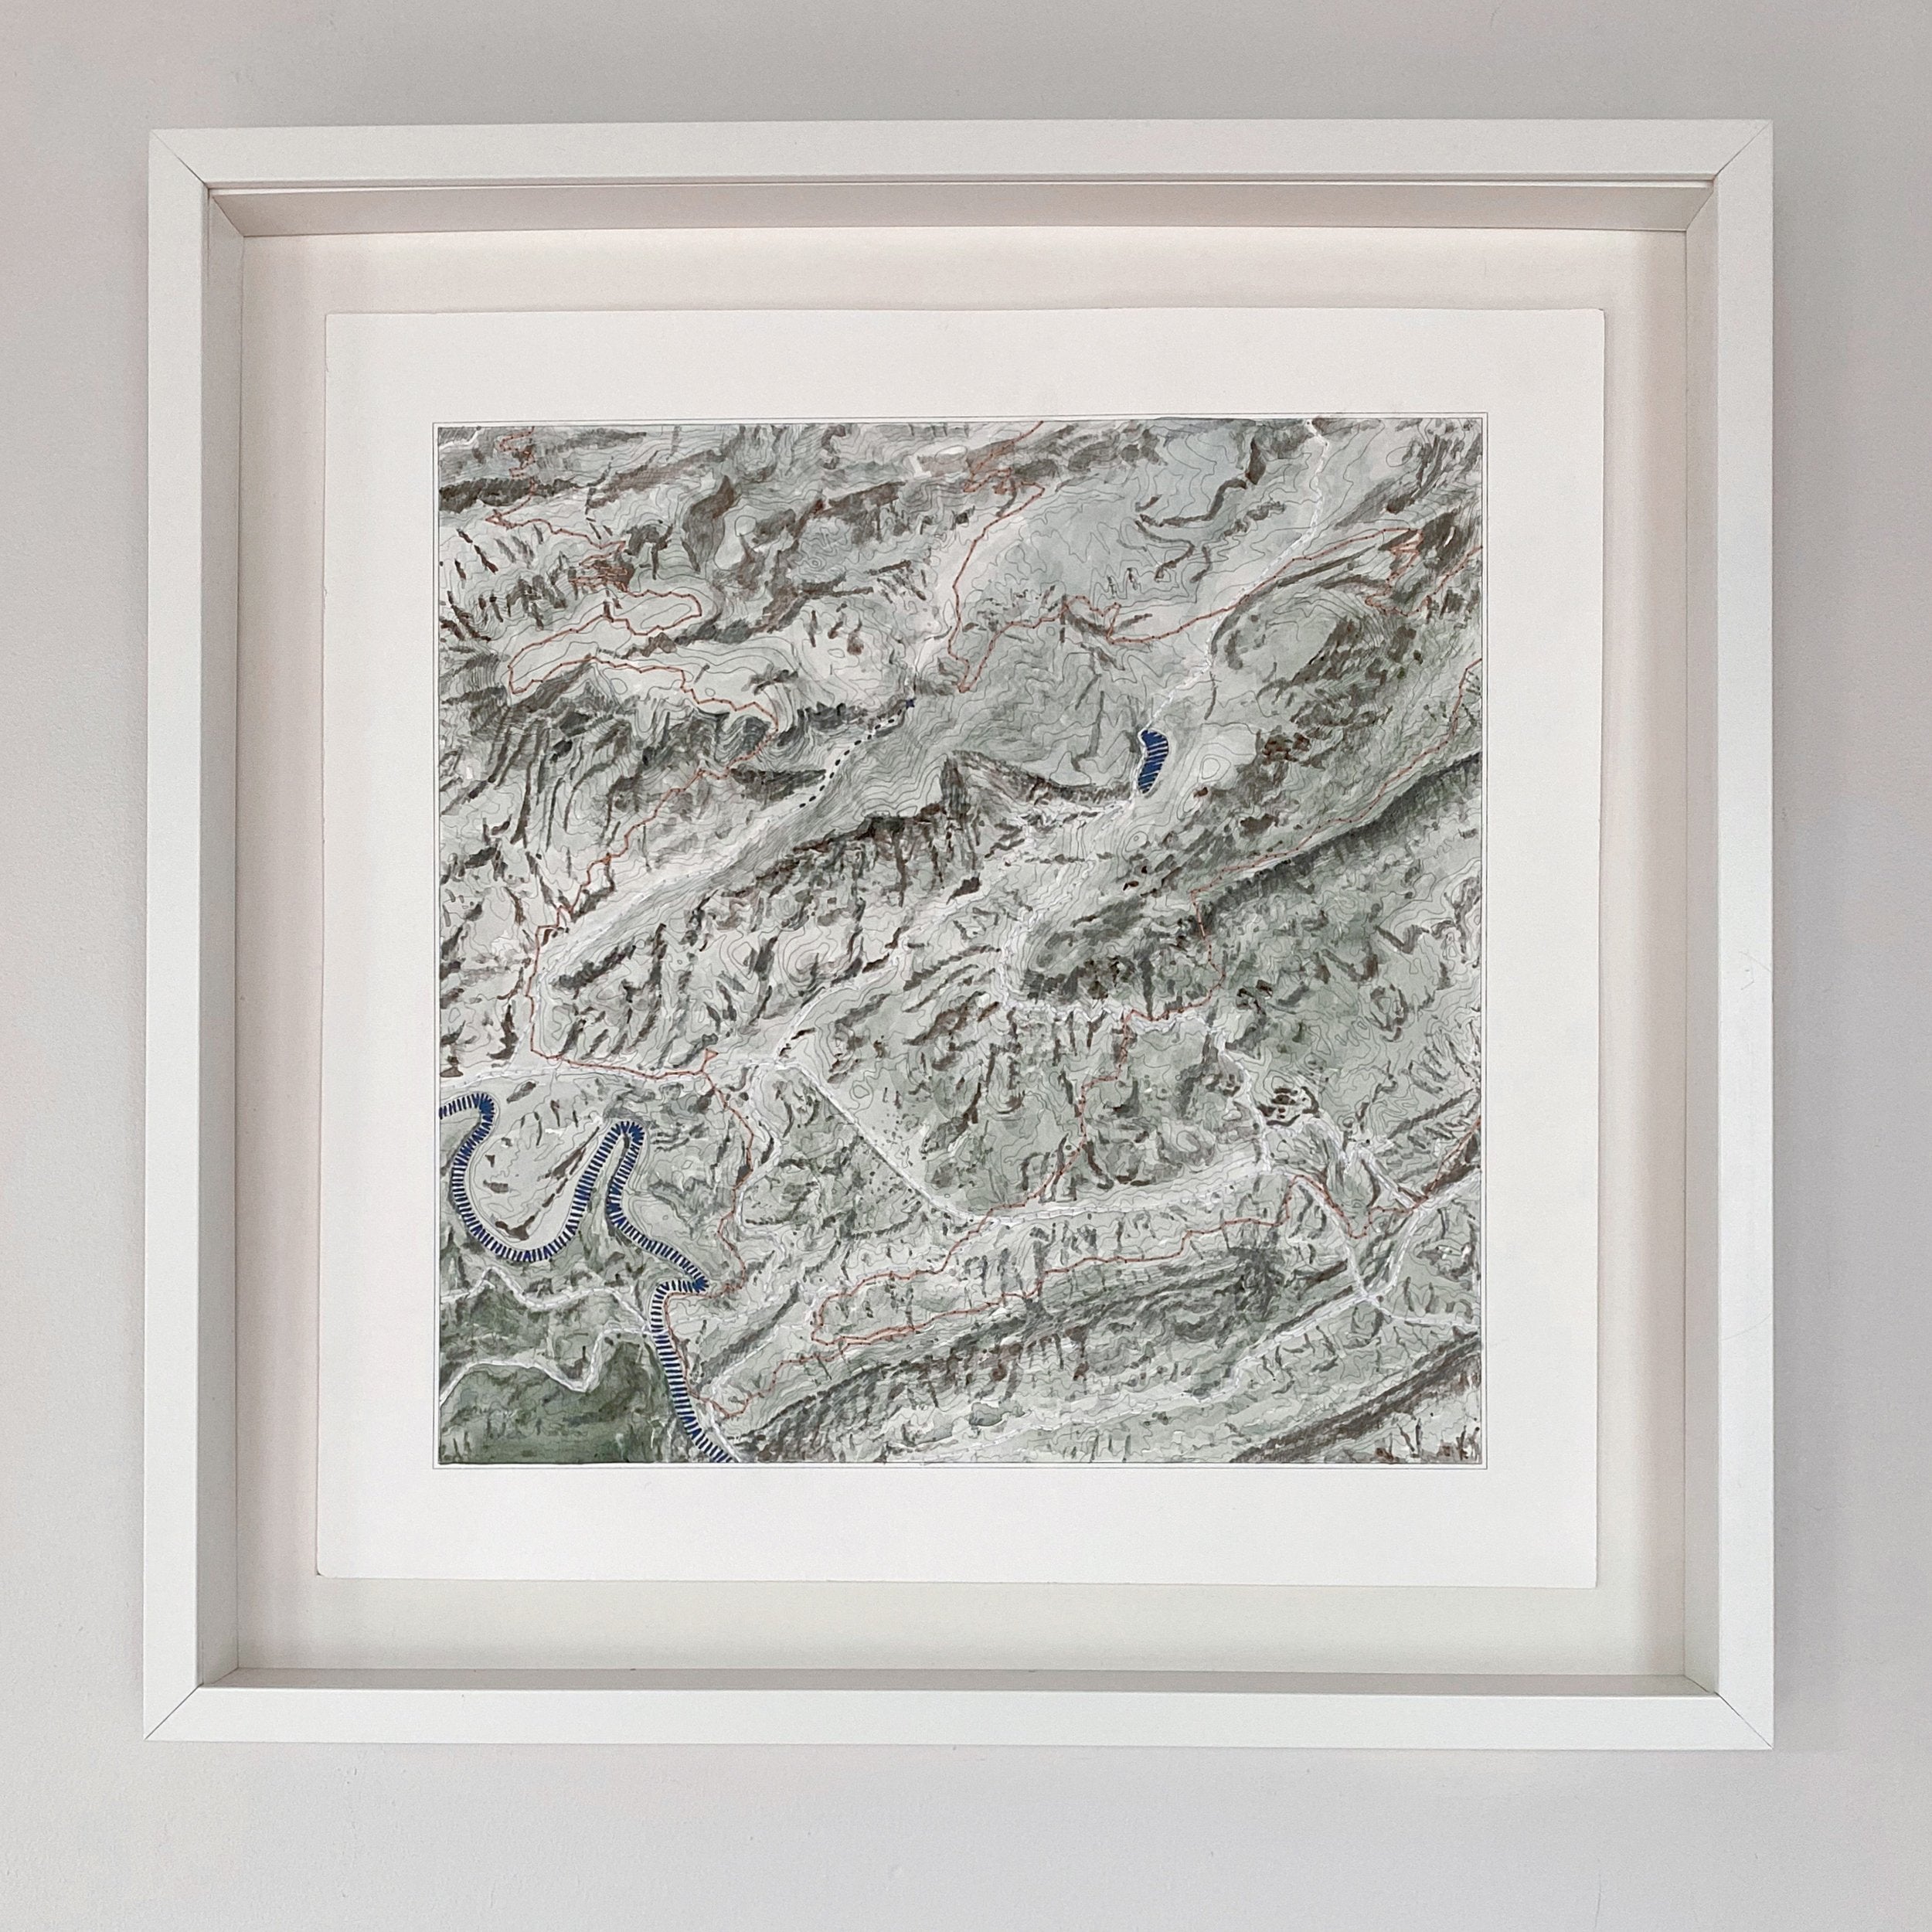 JOURNEY 4 Topographic Watercolor Map: ORIGINAL STITCHED PAINTING + FRAME